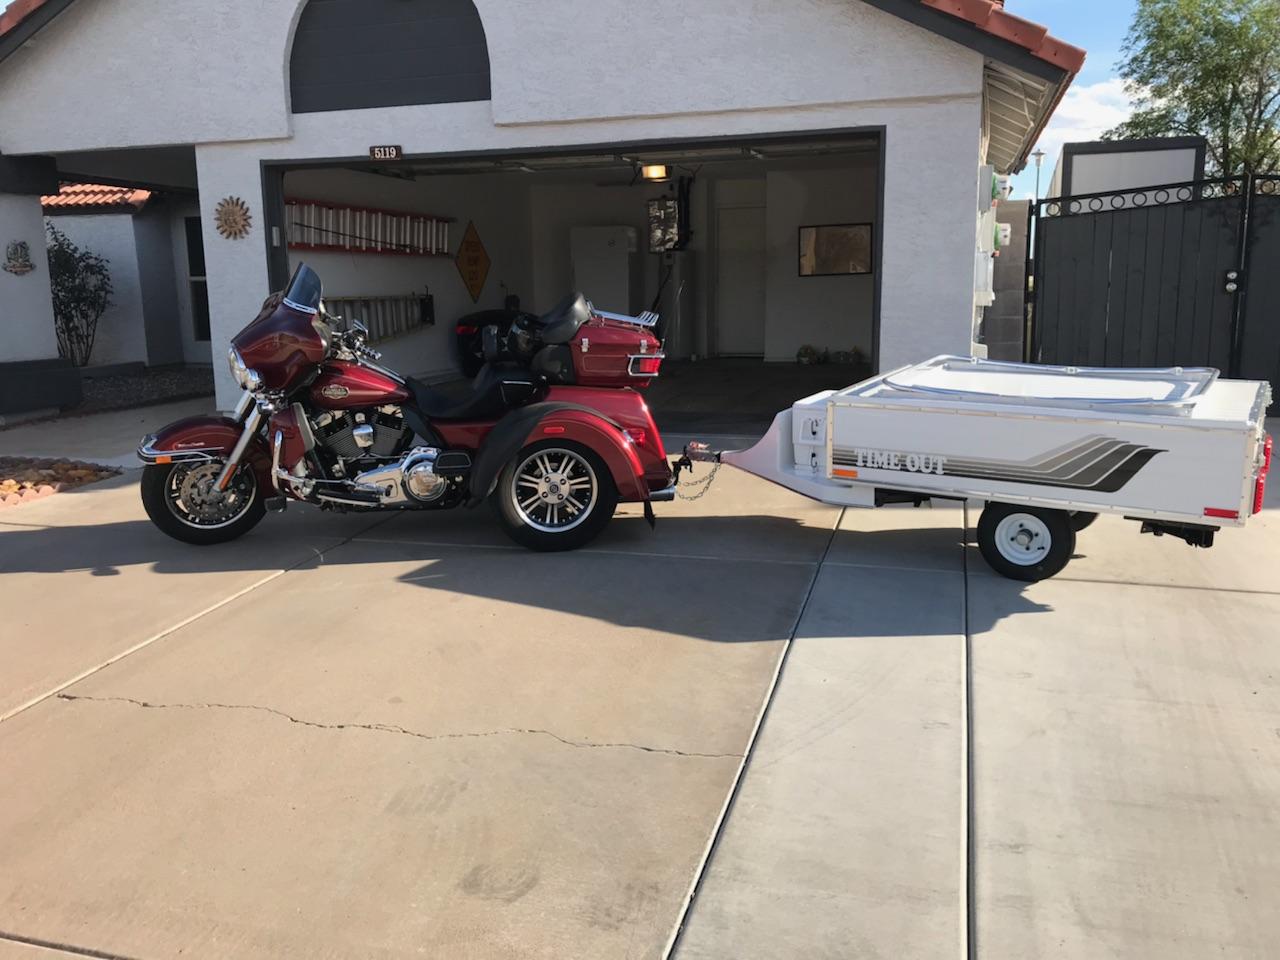 EXCLUSIVE TIME OUT DEALER, barebonesmcenterprises, Motorcycle pull behind trailers for sale, Time out trailers for motorcycles and small cars